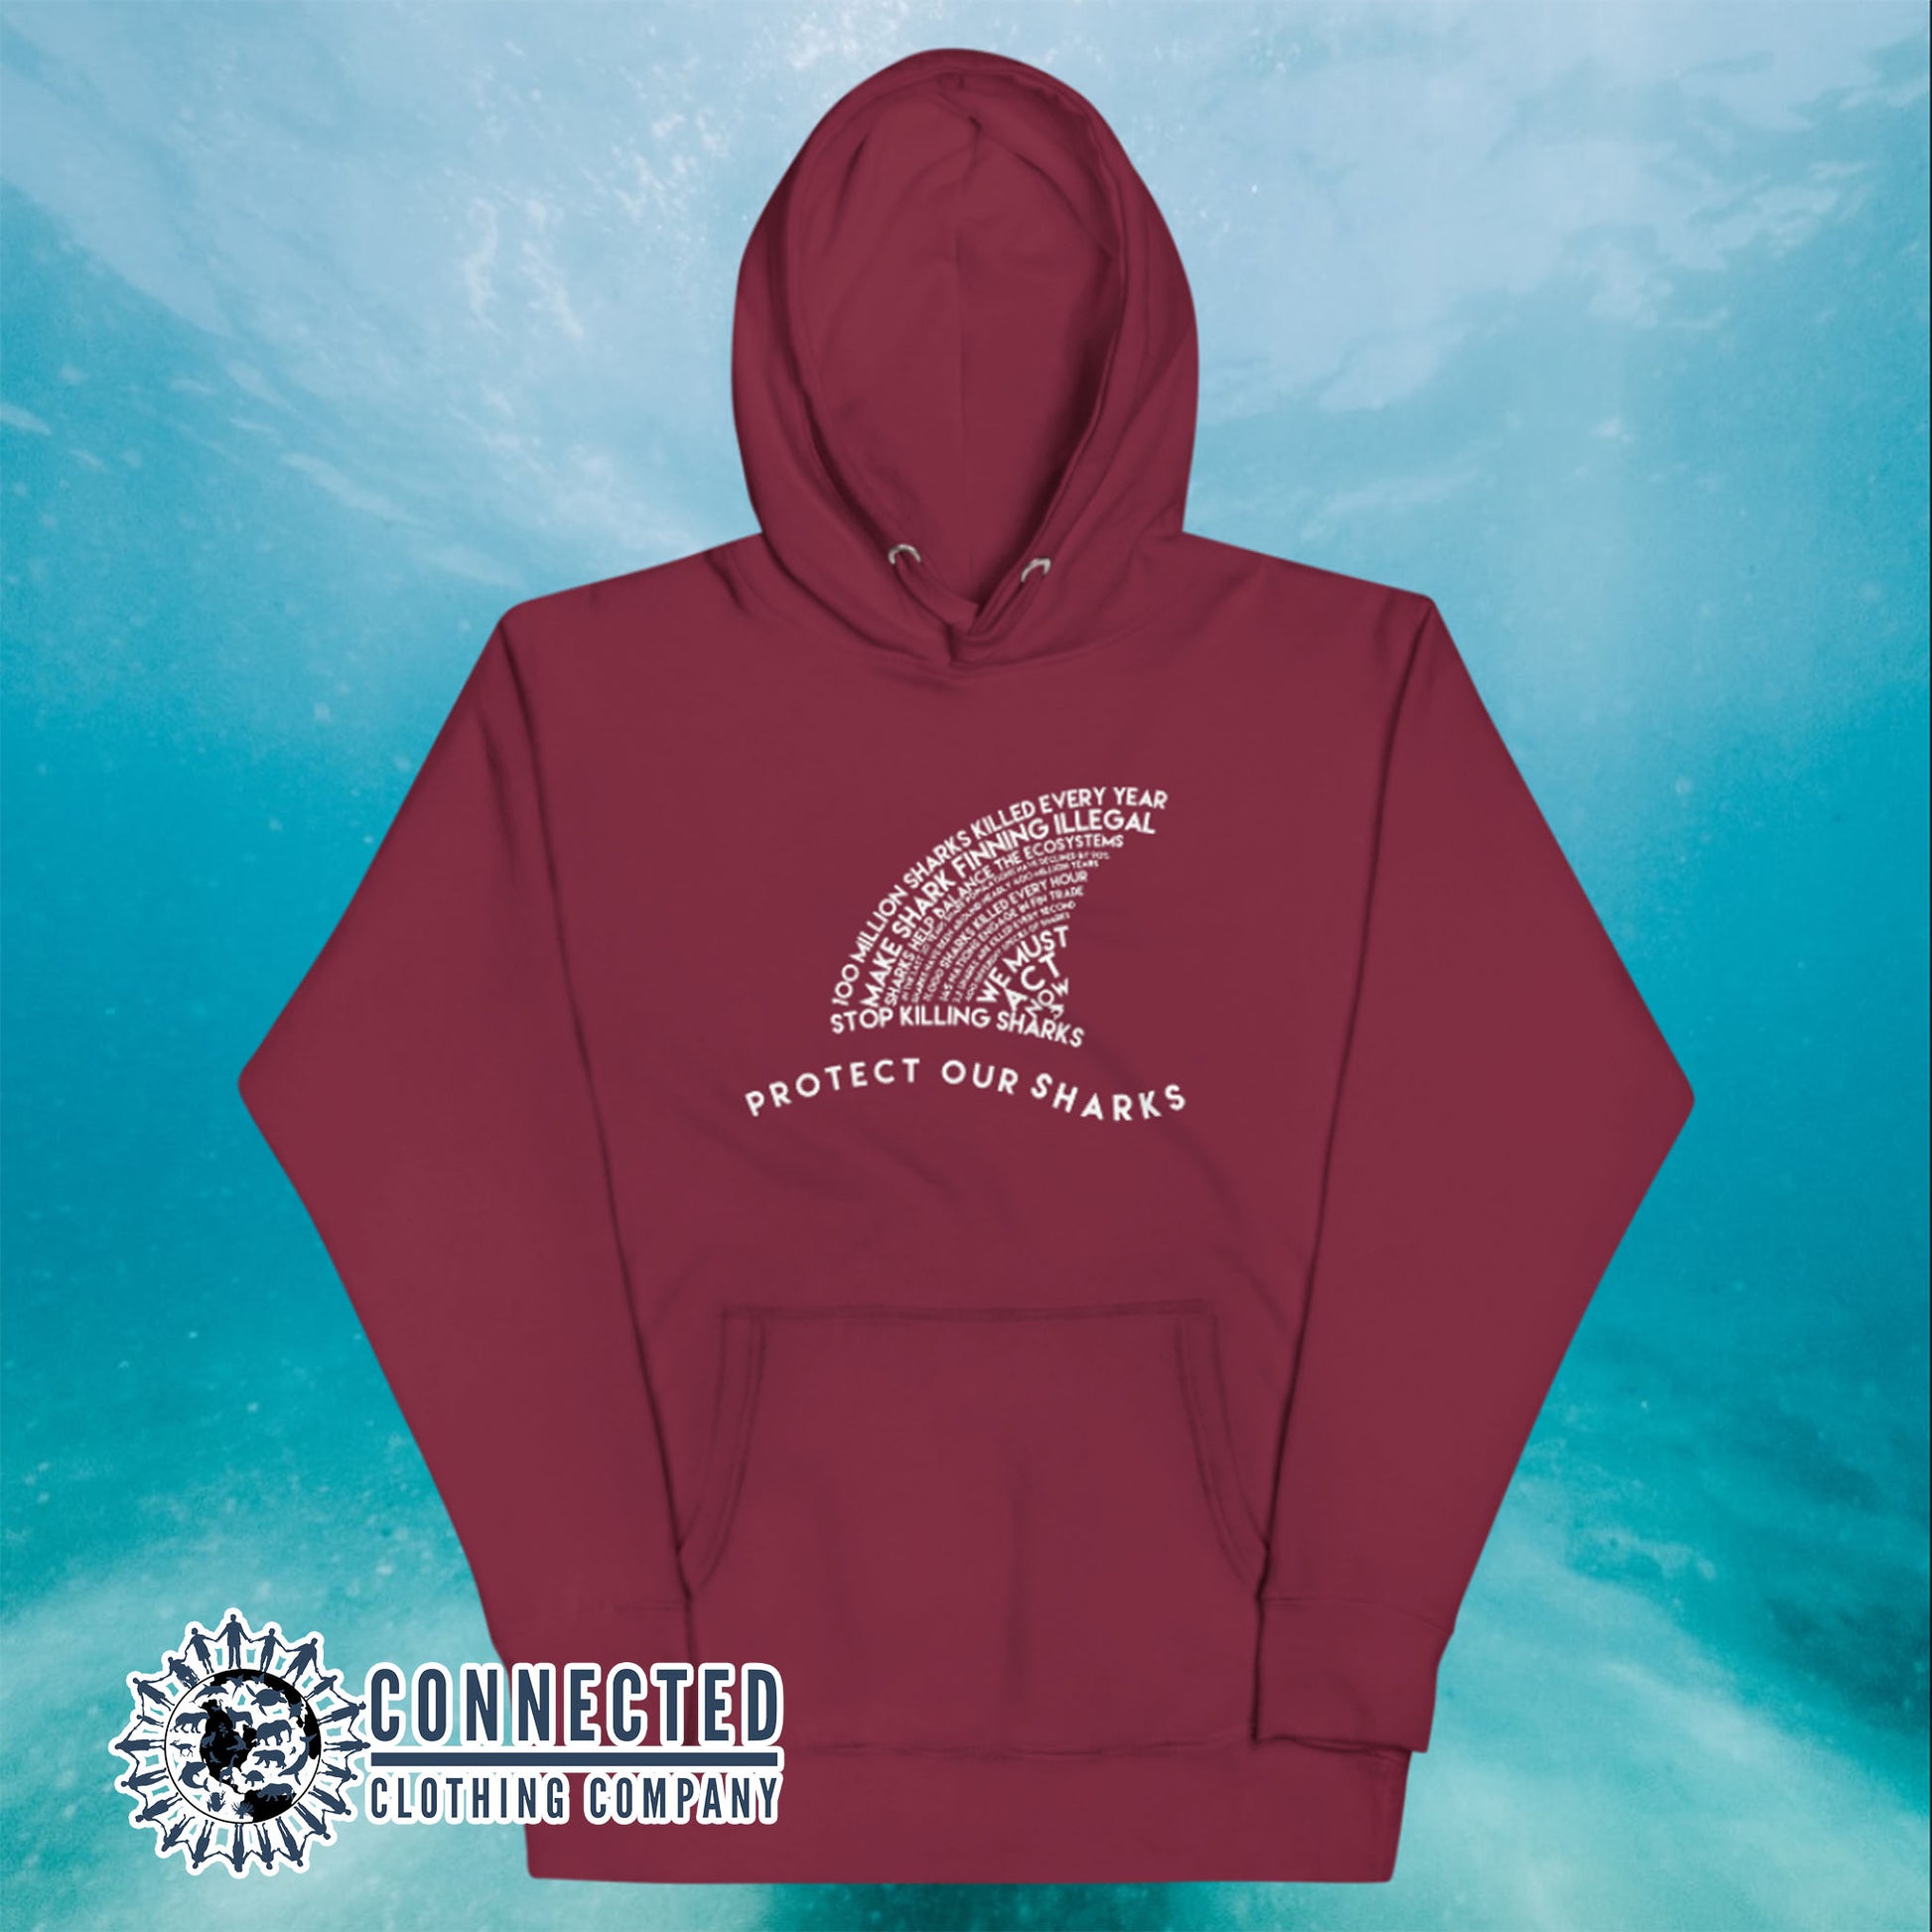 Maroon Protect Our Sharks Unisex Hoodie - Connected Clothing Company - Ethically and Sustainably Made - 10% donated to Oceana shark conservation